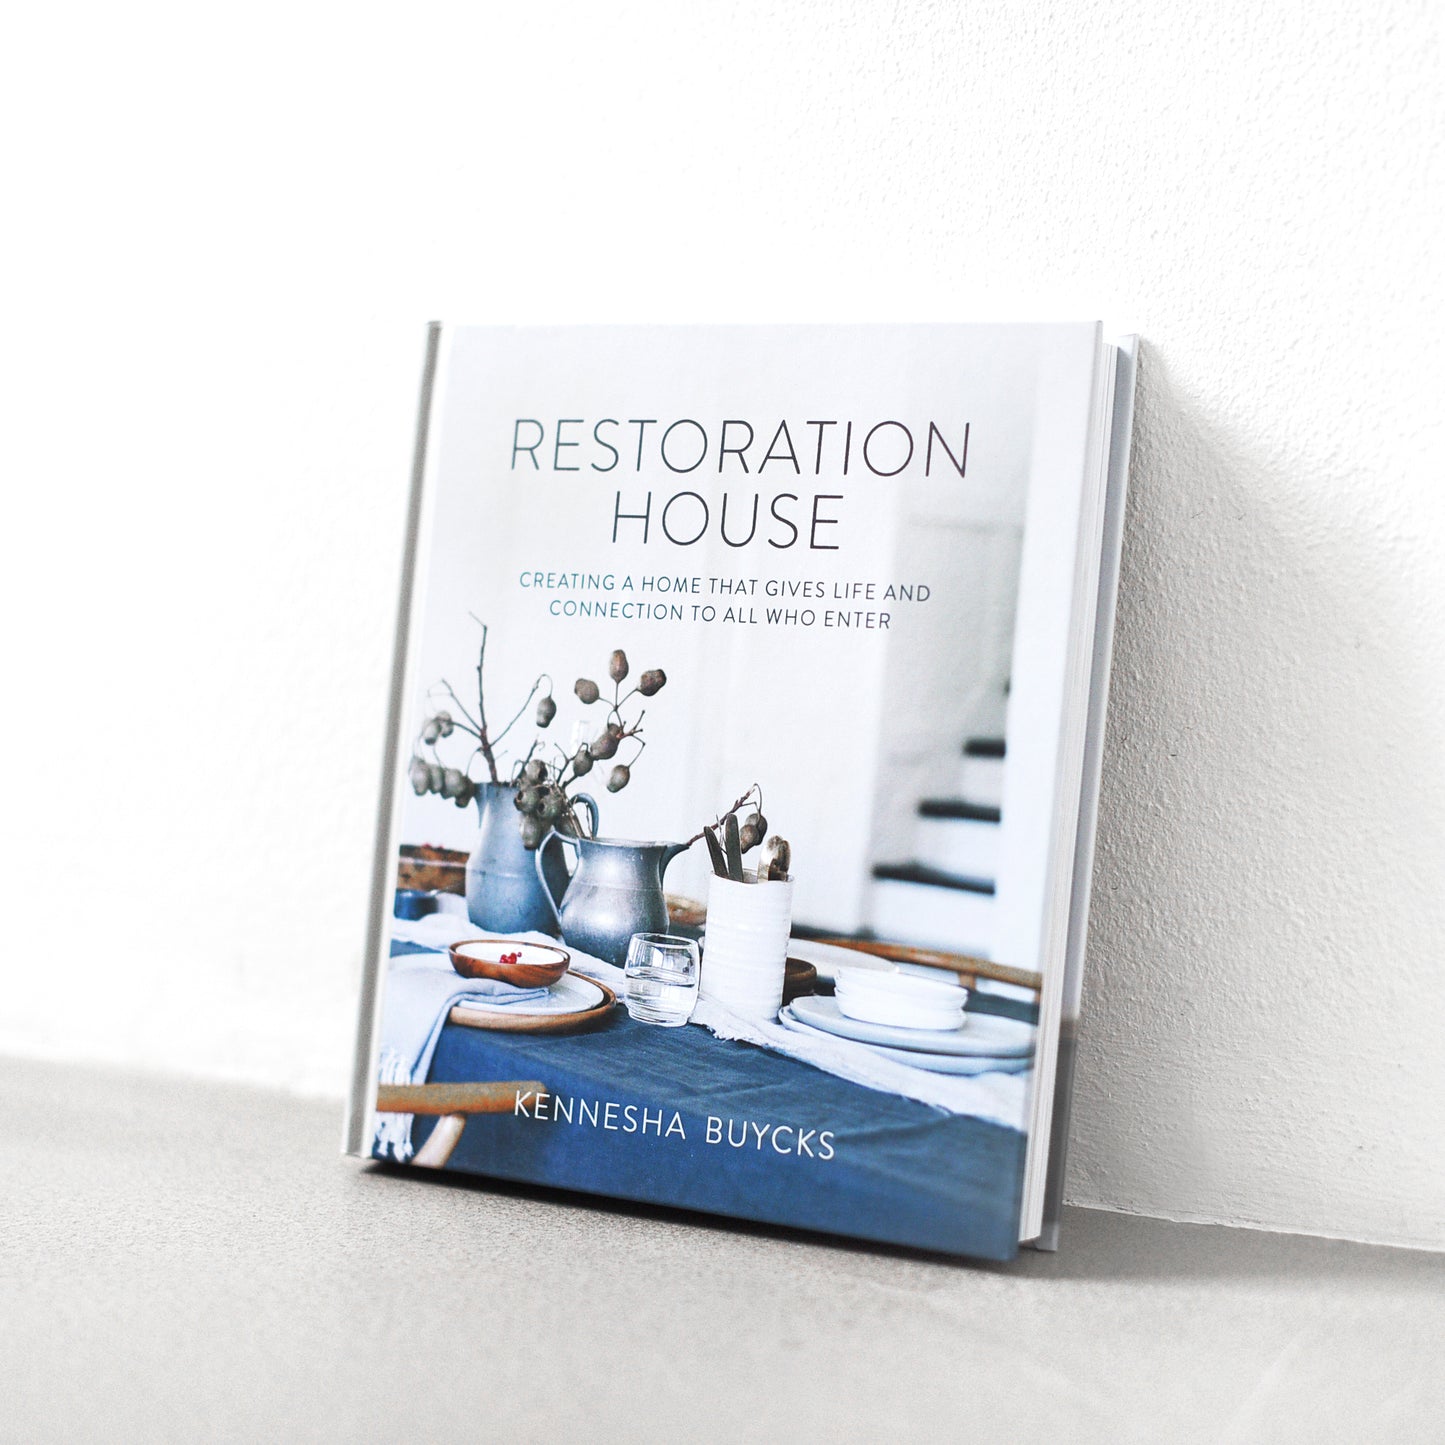 Restoration House: Creating a Home That Gives Life and Connection to All Who Enter